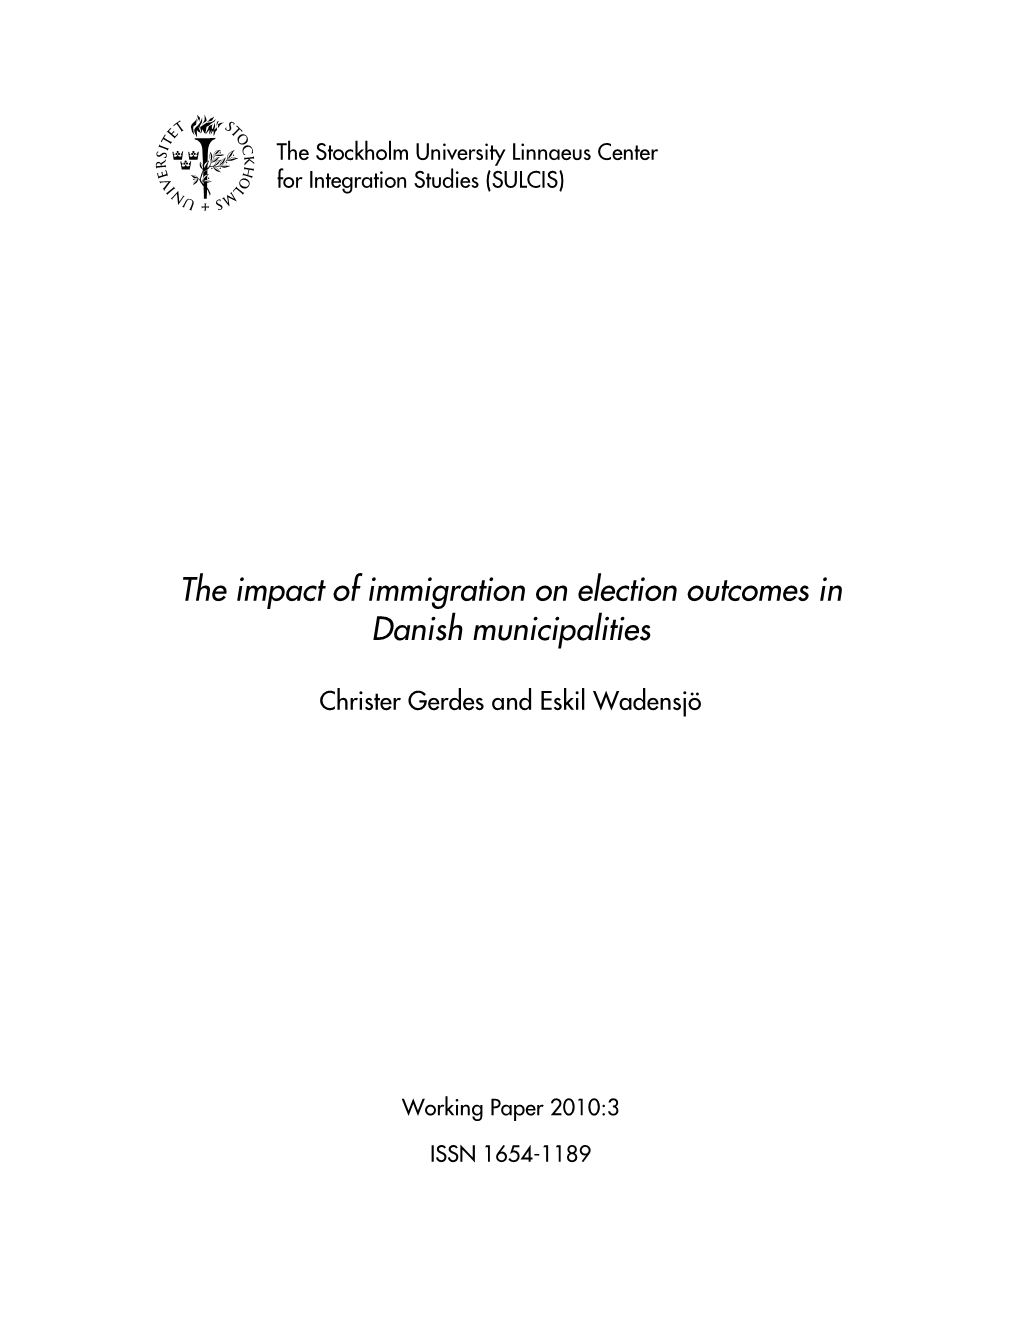 The Impact of Immigration on Election Outcomes in Danish Municipalities